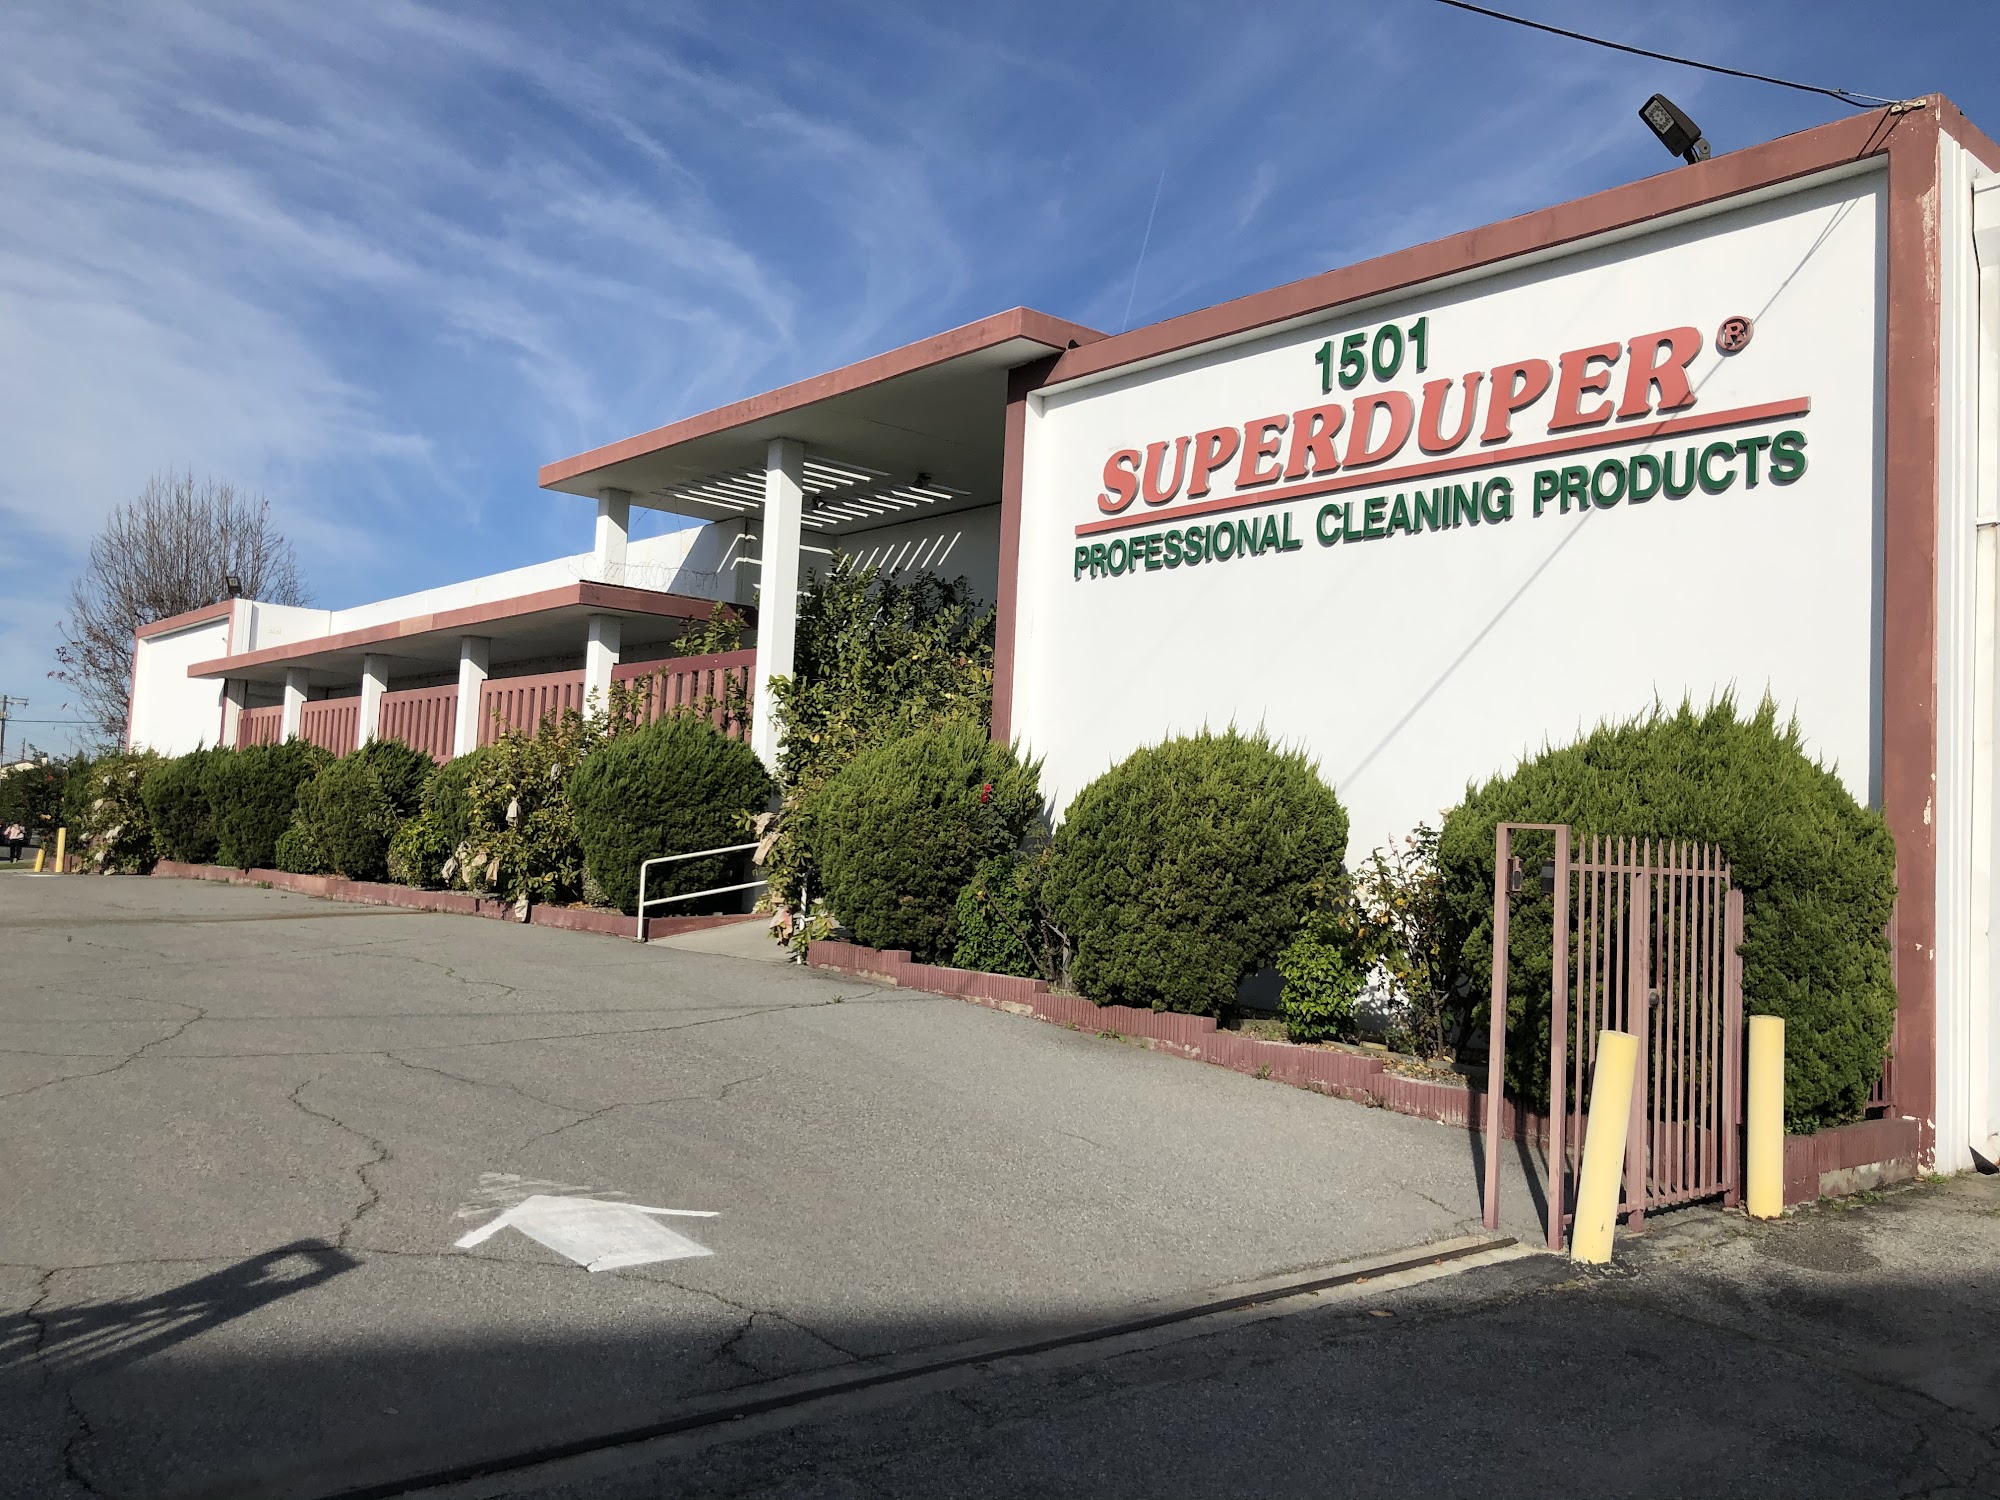 Superduper Cleaning Supply Co